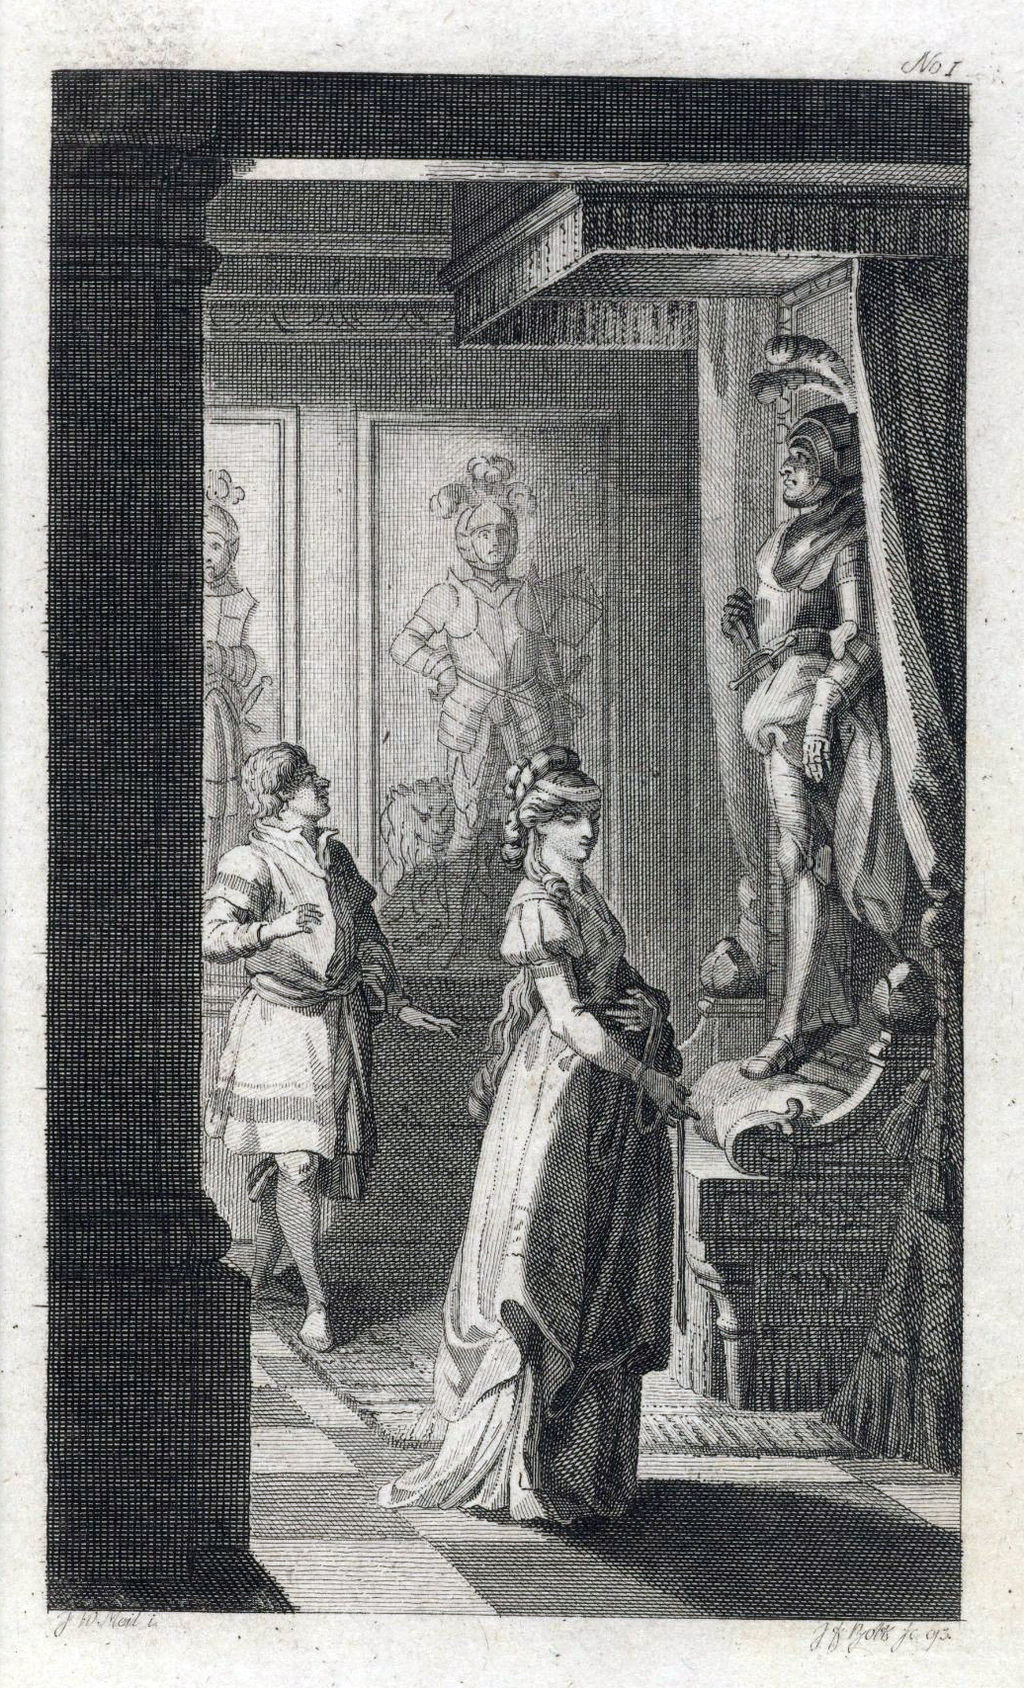 An engraving of a woman and a man in a room.